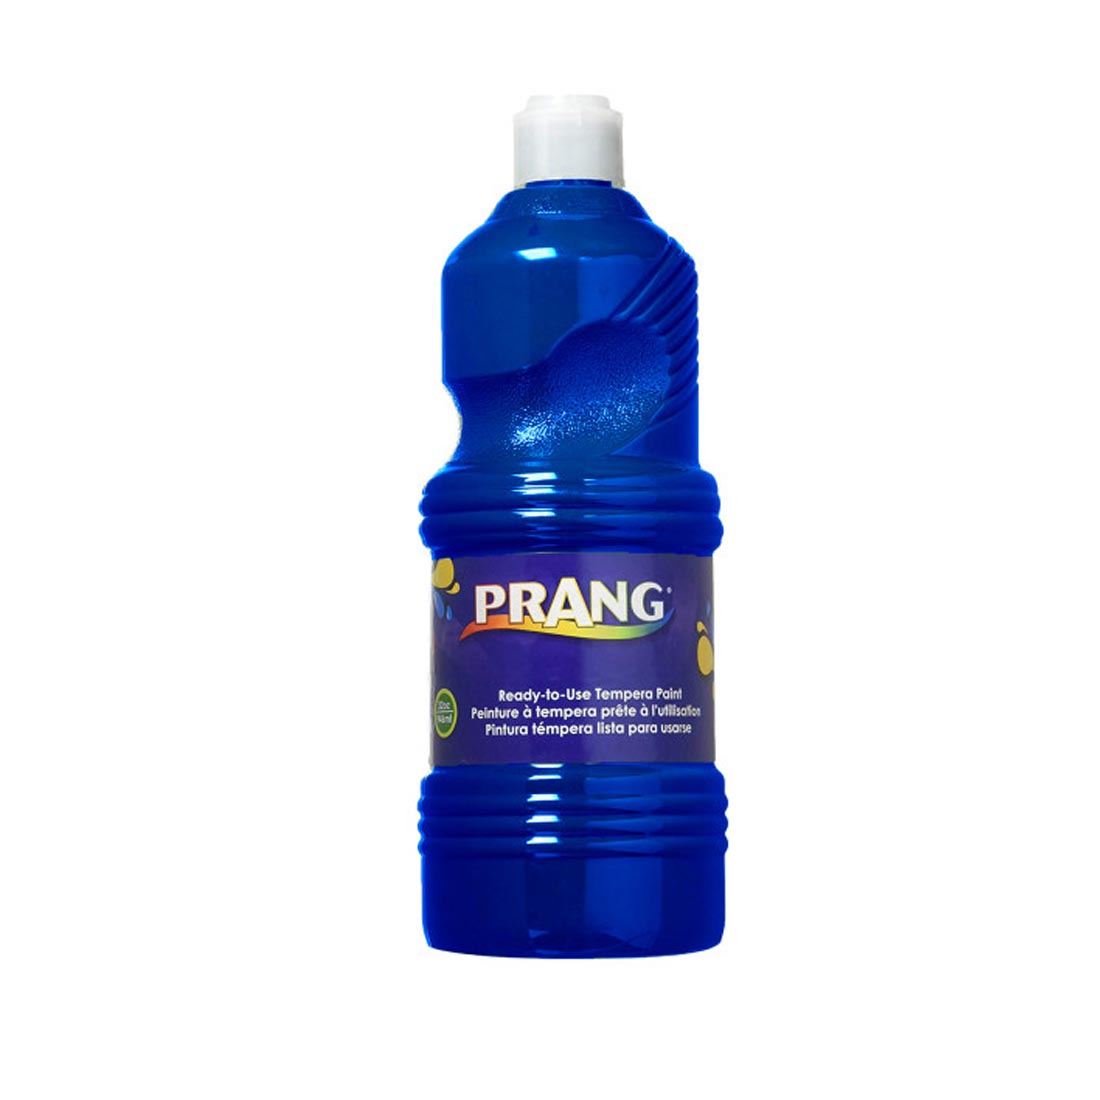 Blue Prang Ready-To-Use Tempera Paint